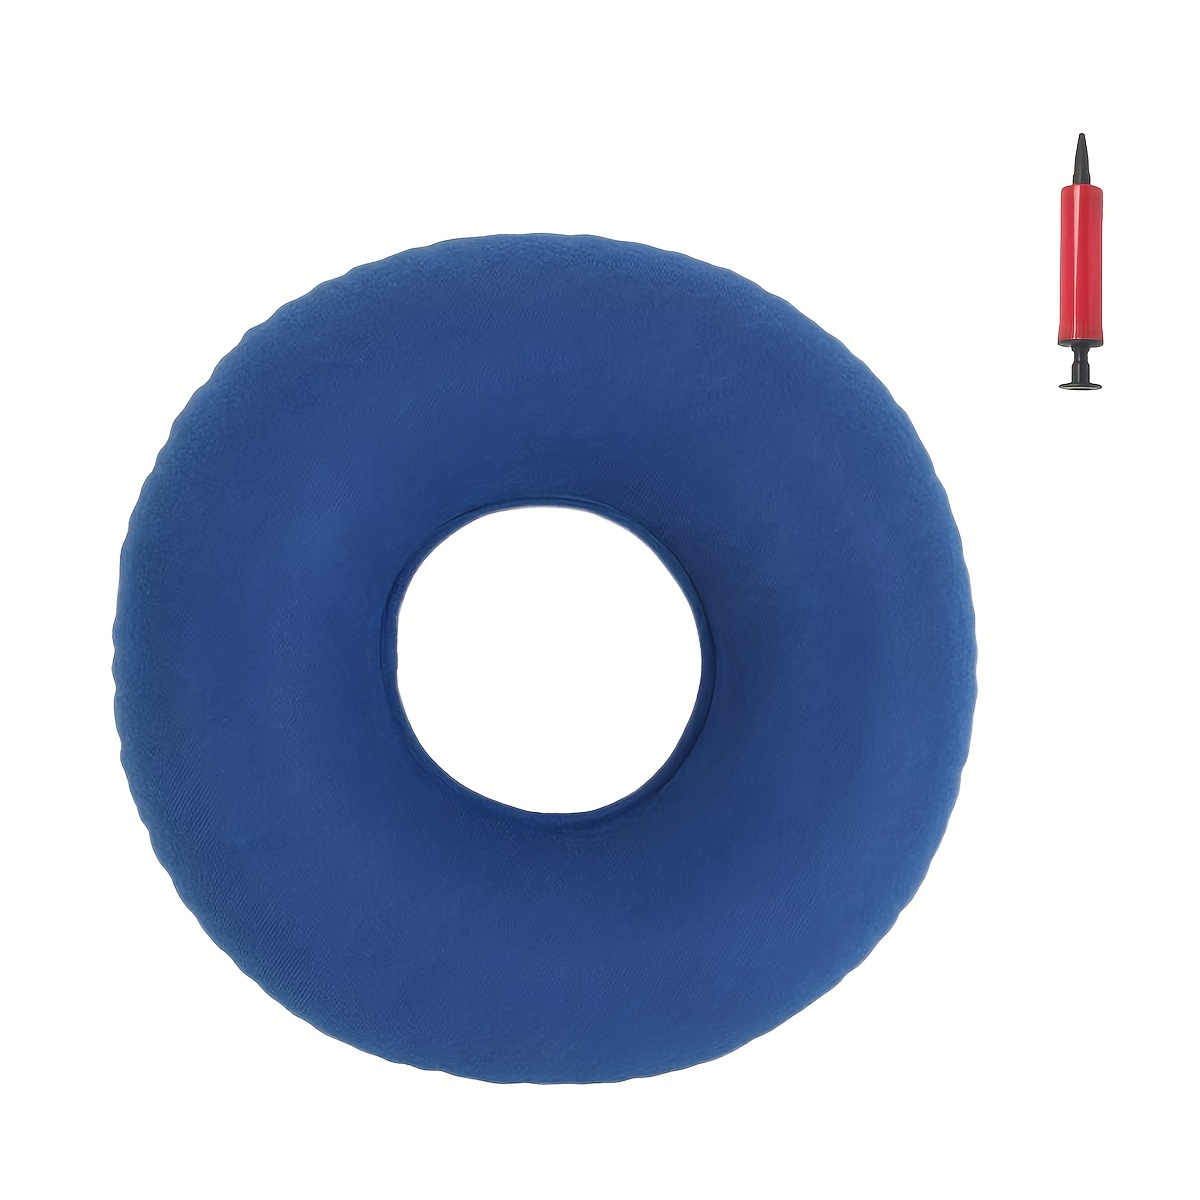 Coccyx Cushion Cooling Gel Memory Foam Orthopedic Donut Pillow for Tailbon  Pain